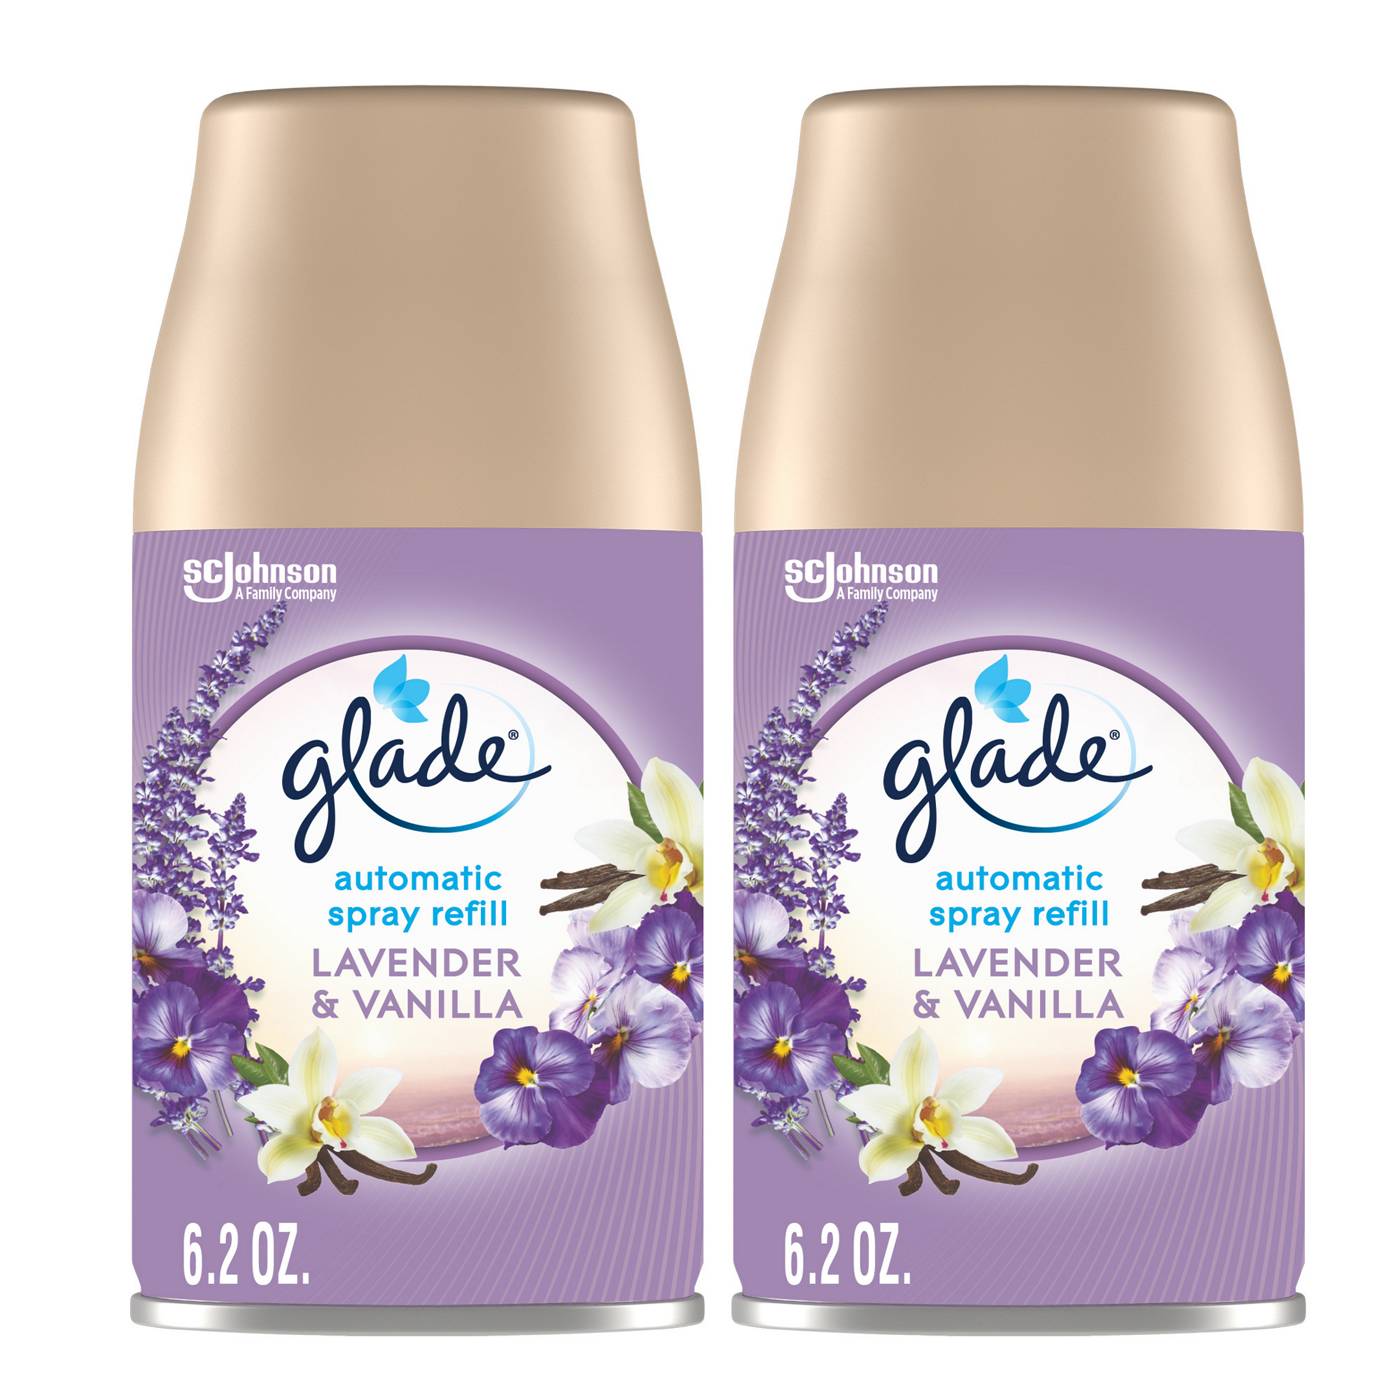 Glade Automatic Spray Refill, Value Pack - Lavender & Vanilla; image 1 of 3